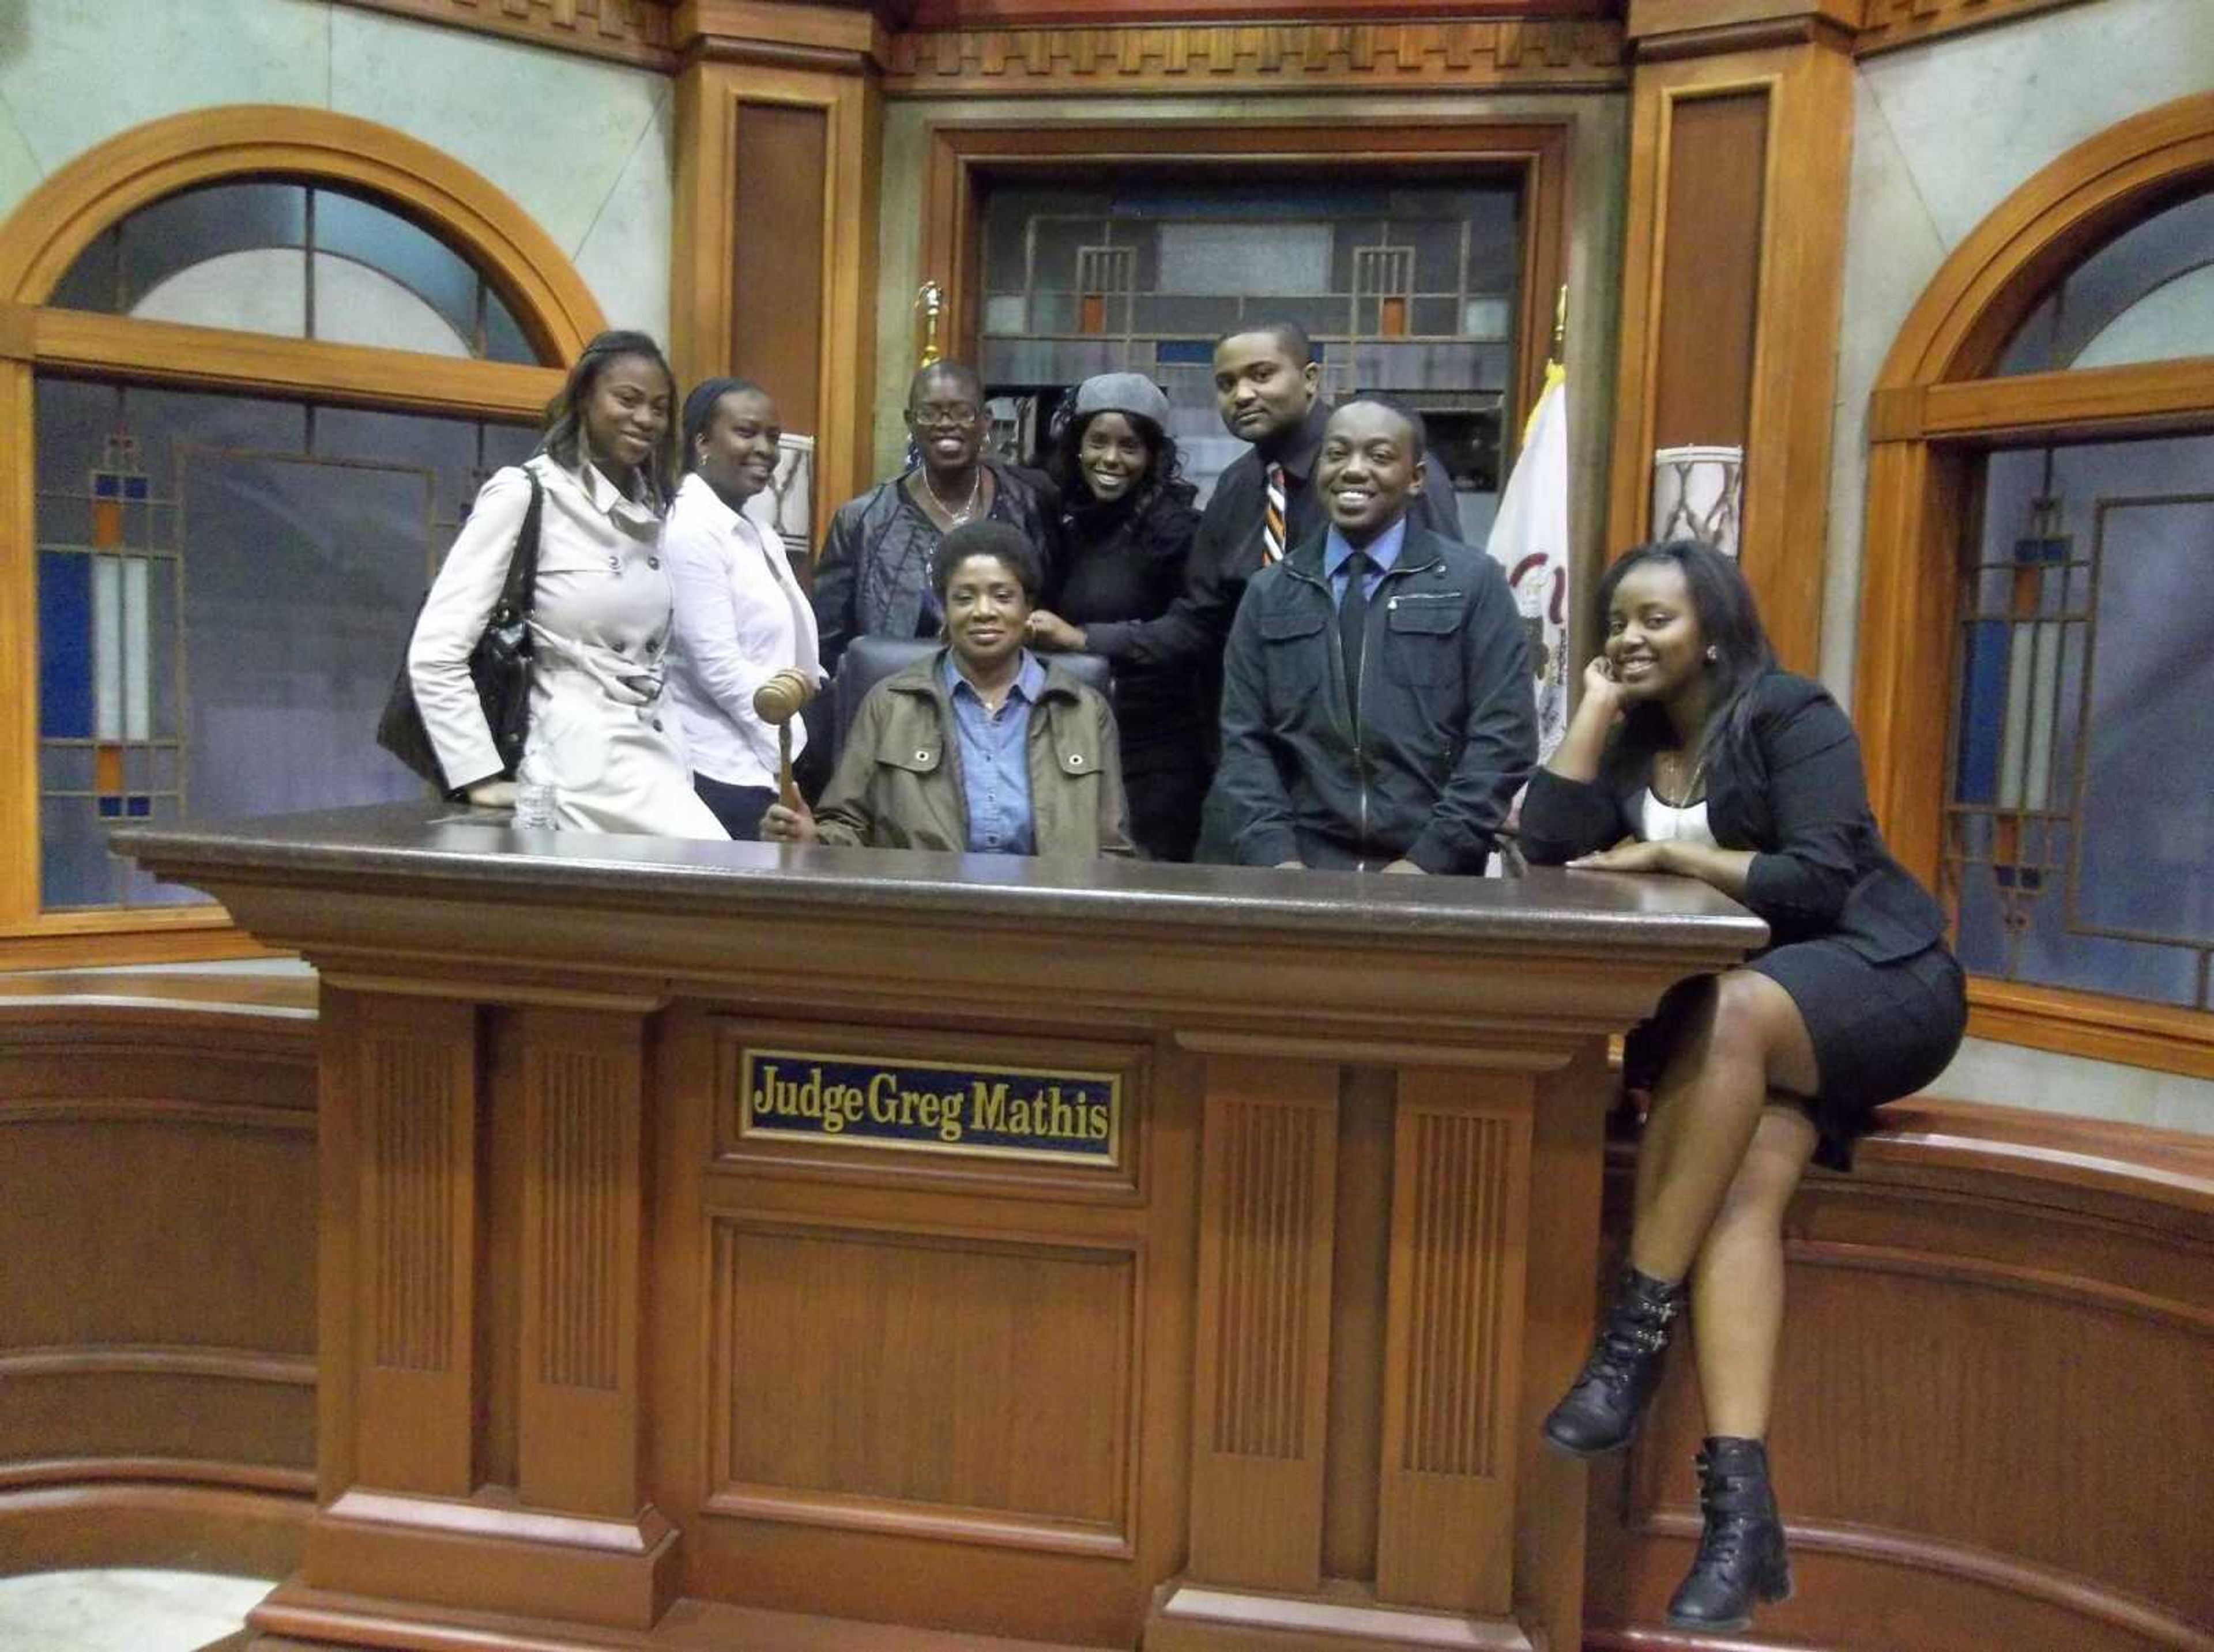 Students and professors from NABJ visited different media outlets in Chicago. One of their stops was the station where the "Judge Mathis" show is filmed. - Photos submitted by Dr. Tamara Zellars Buck